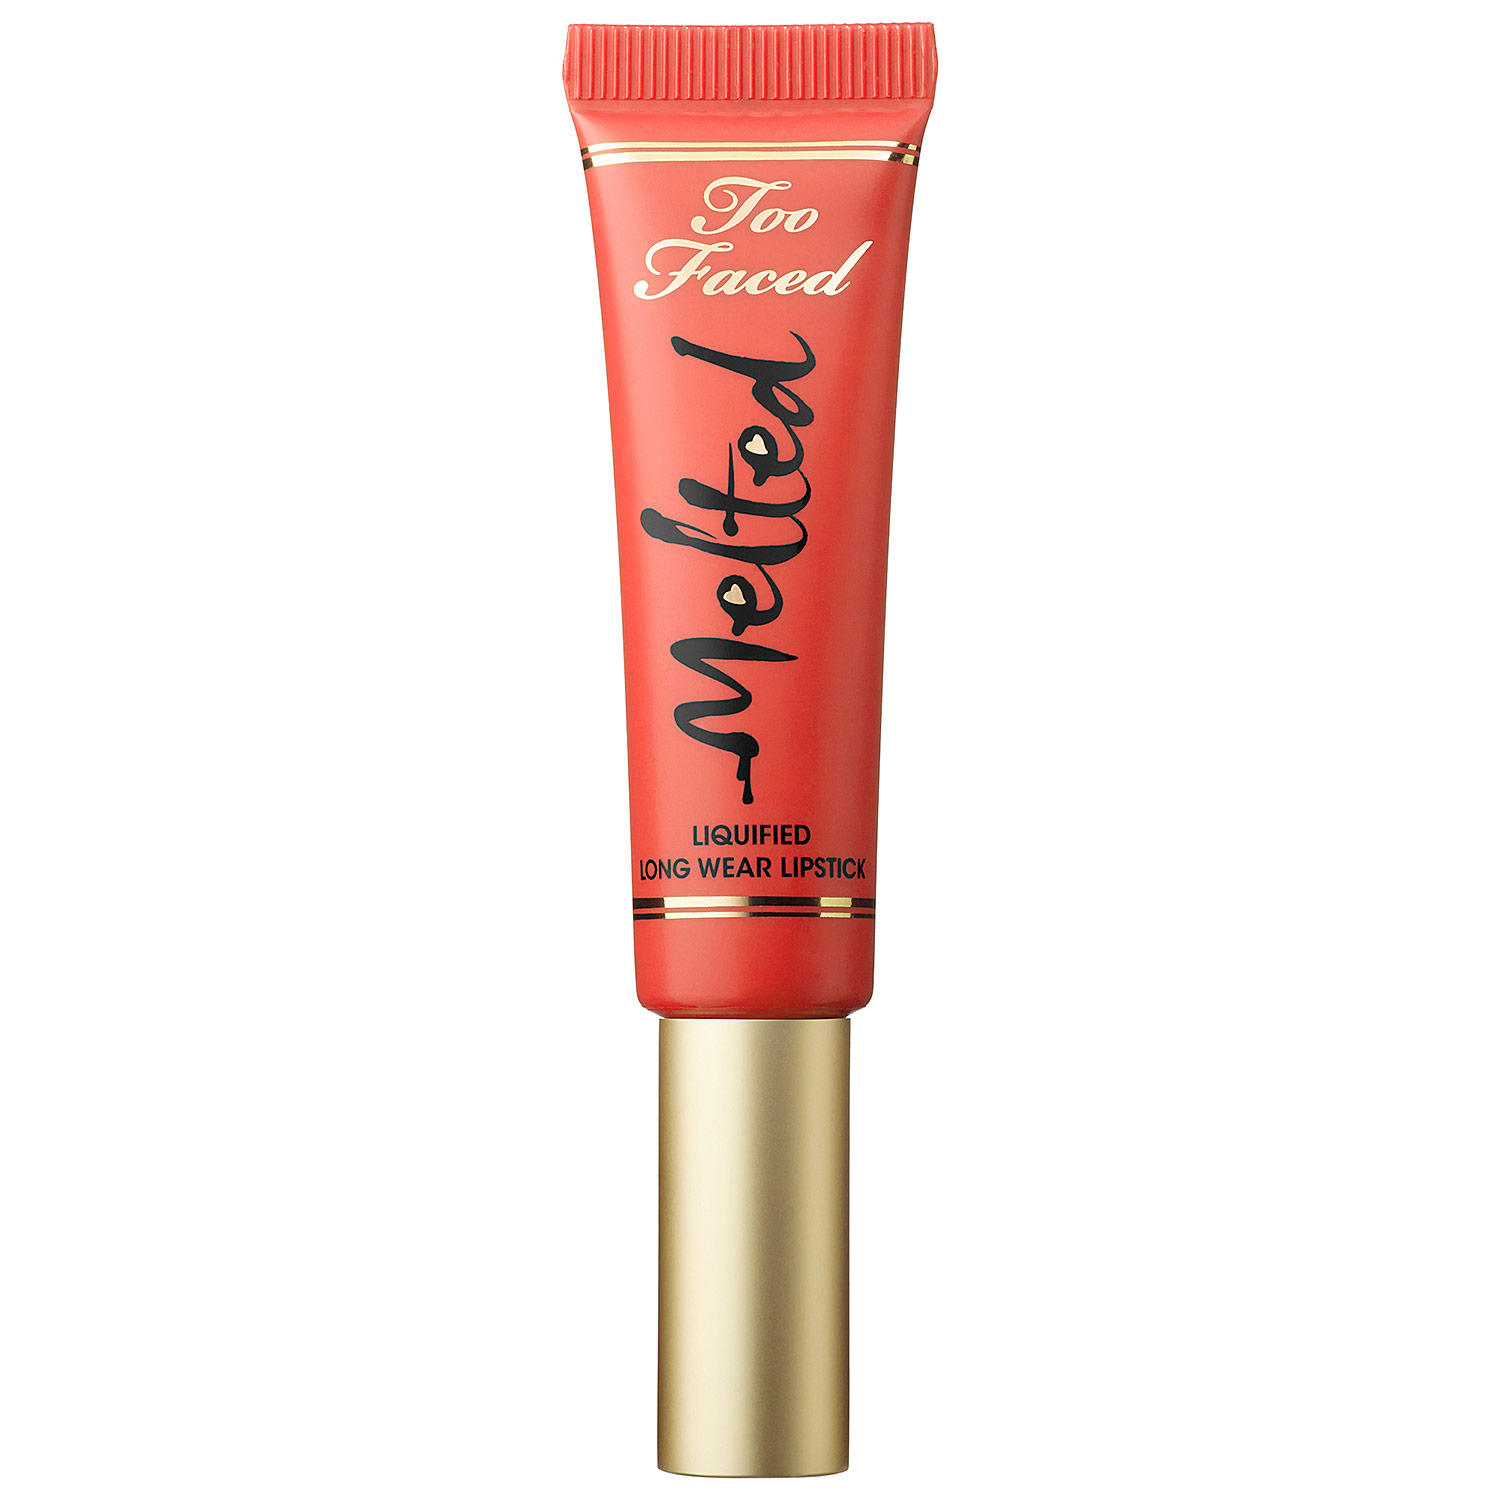 Too Faced Melted Liquified Long Wear Lipstick Melted Coral